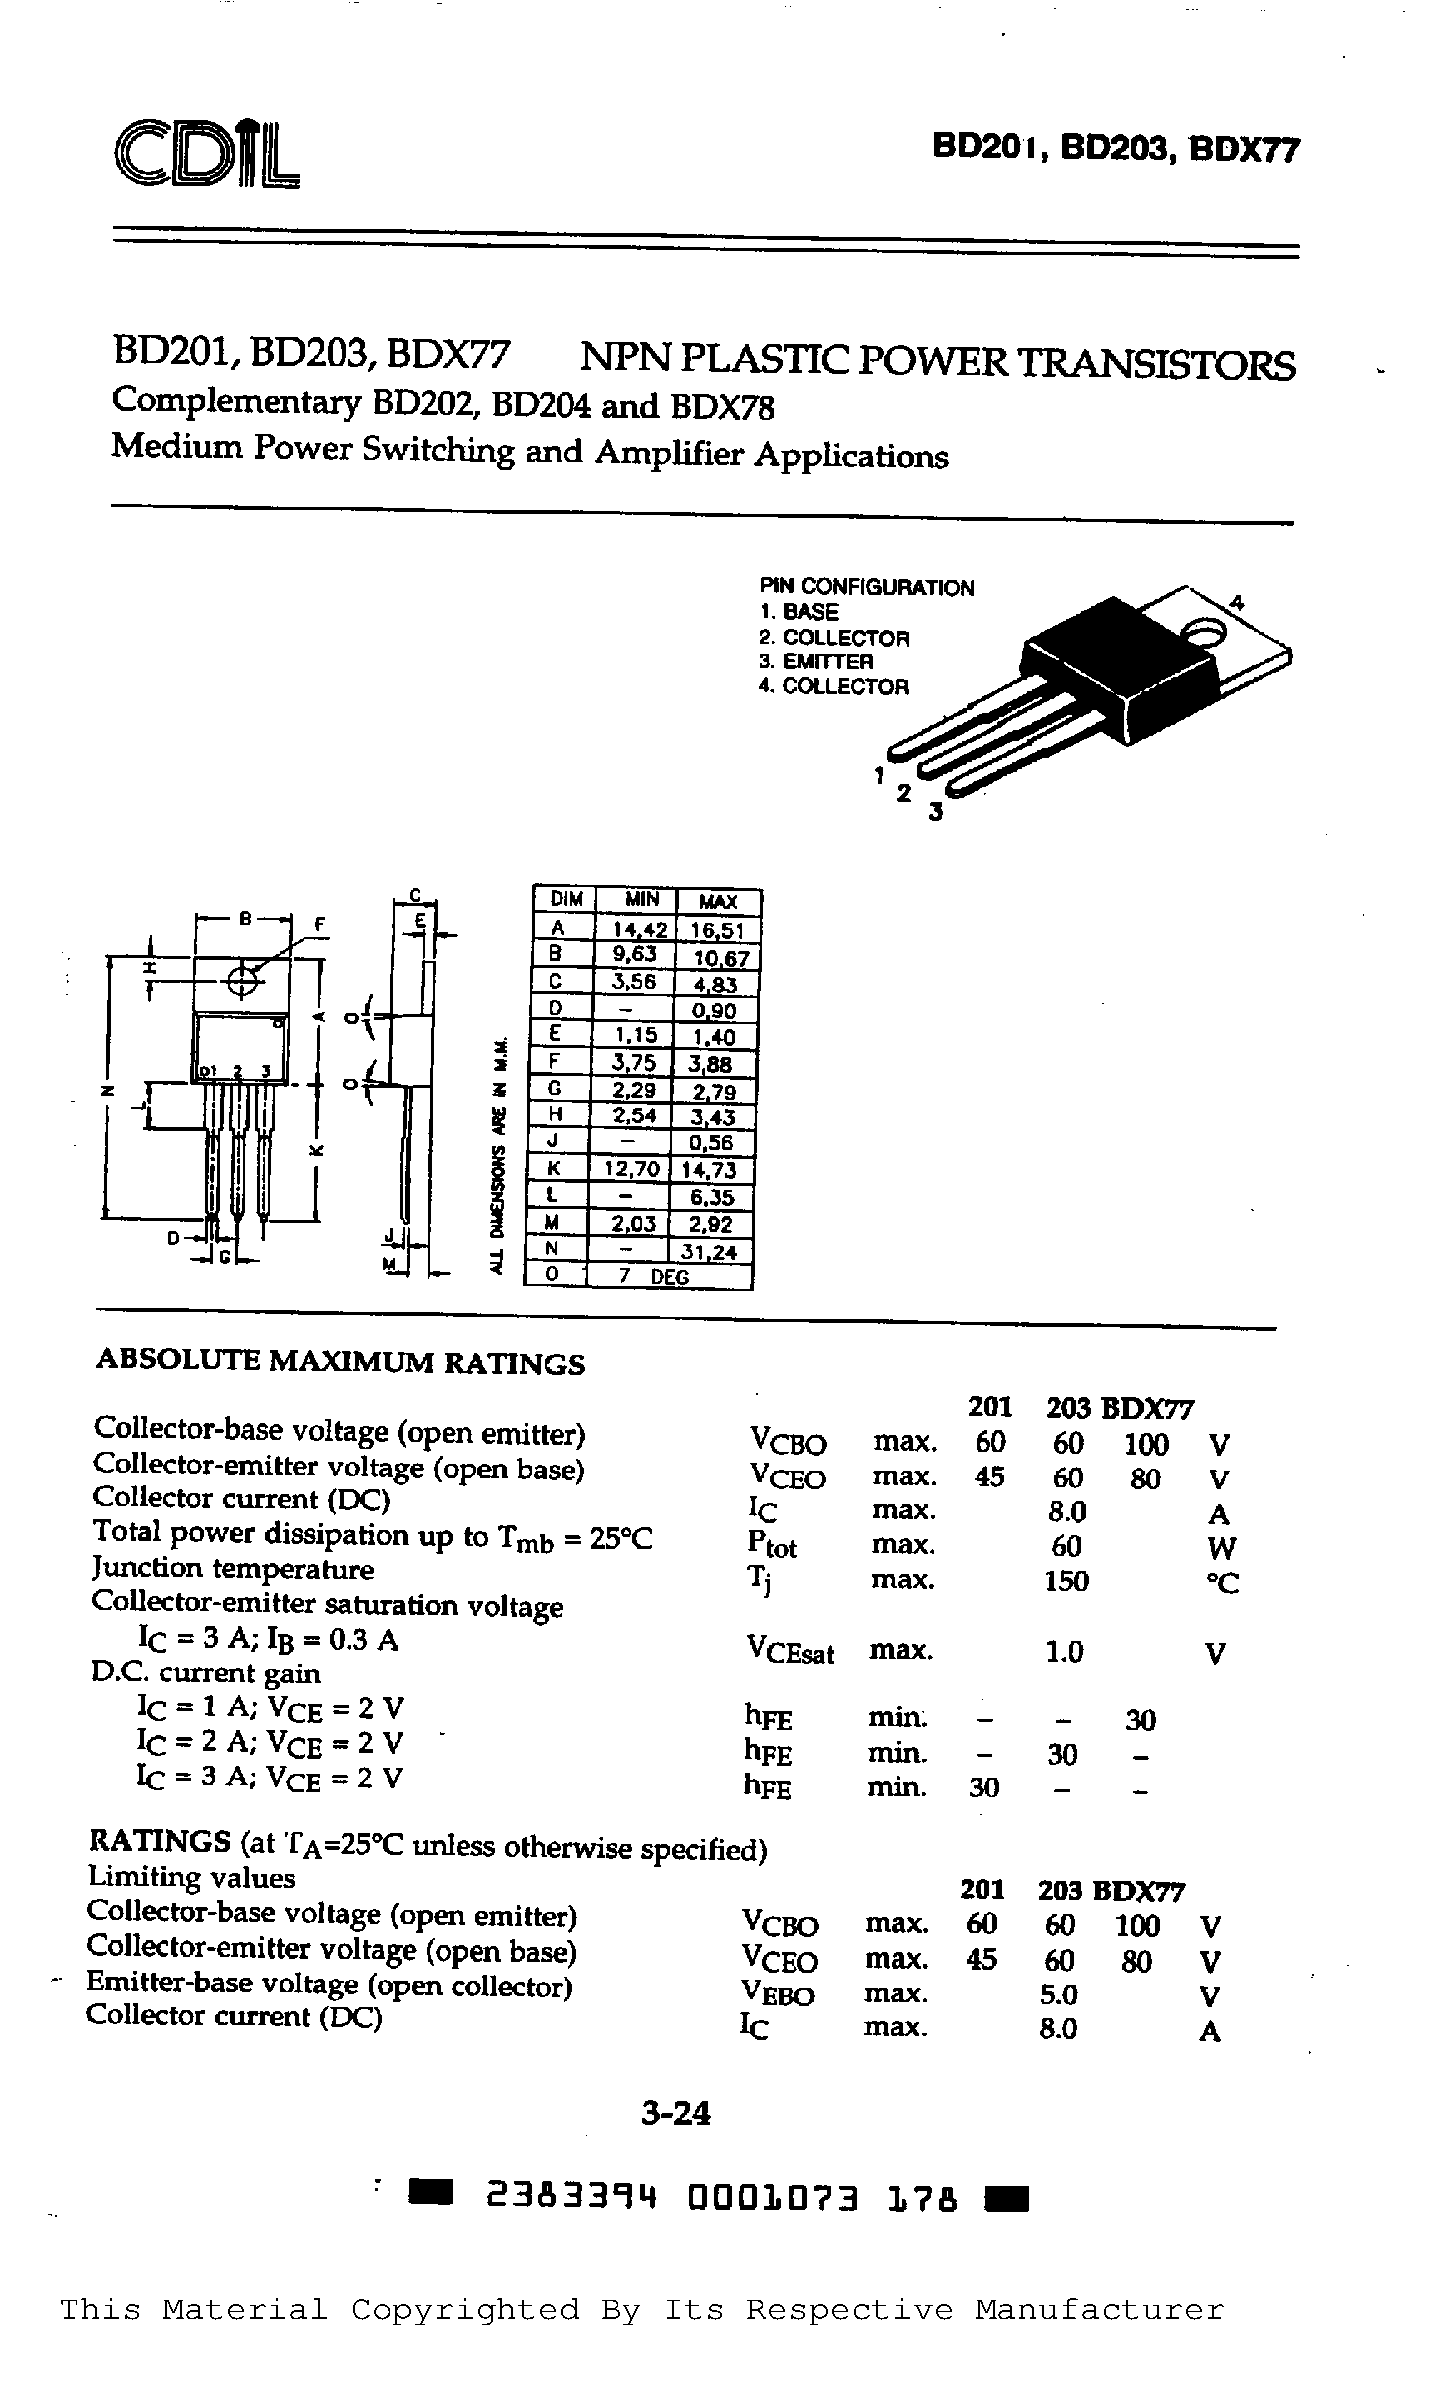 Datasheet BDX77 - Medium Power Switching and Amplifier Applications page 1